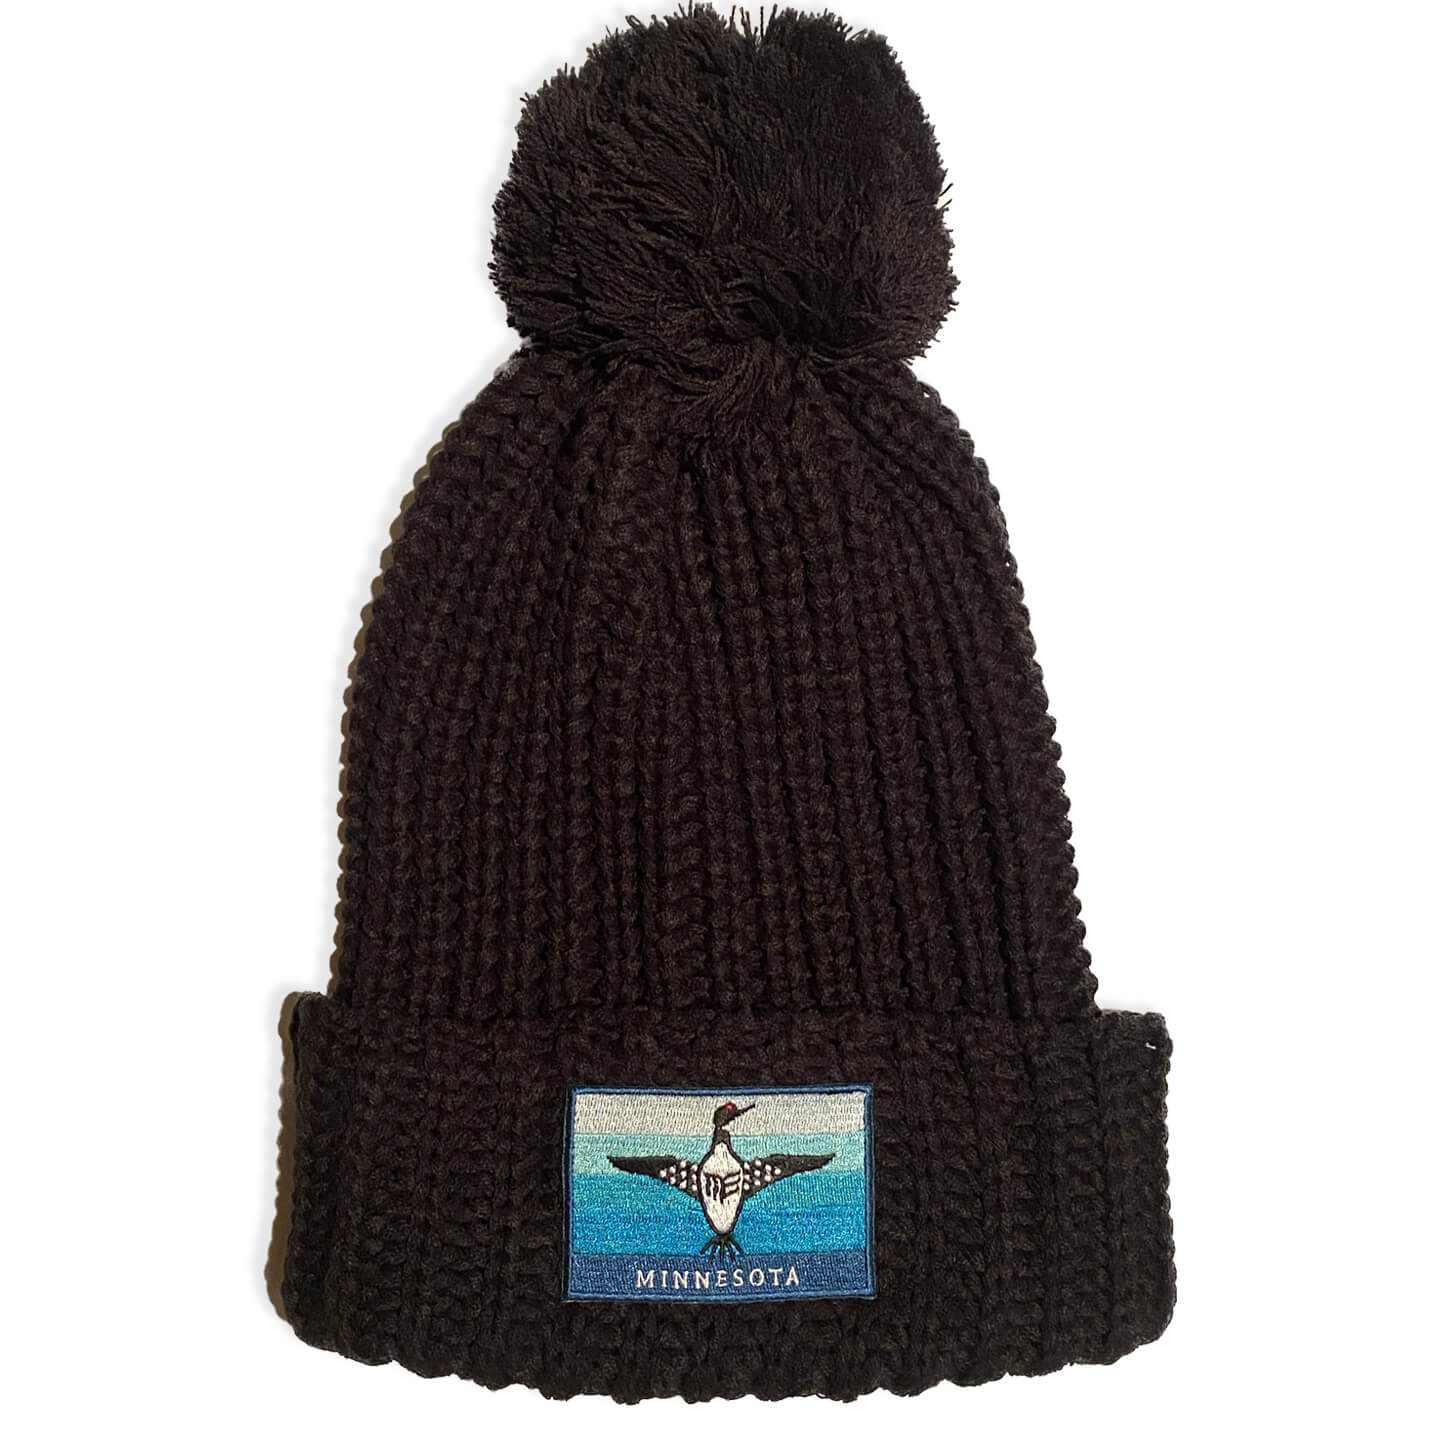 Black Chunky Cable with Cuff & Pom Beanie with Blue Loon Flag Patch